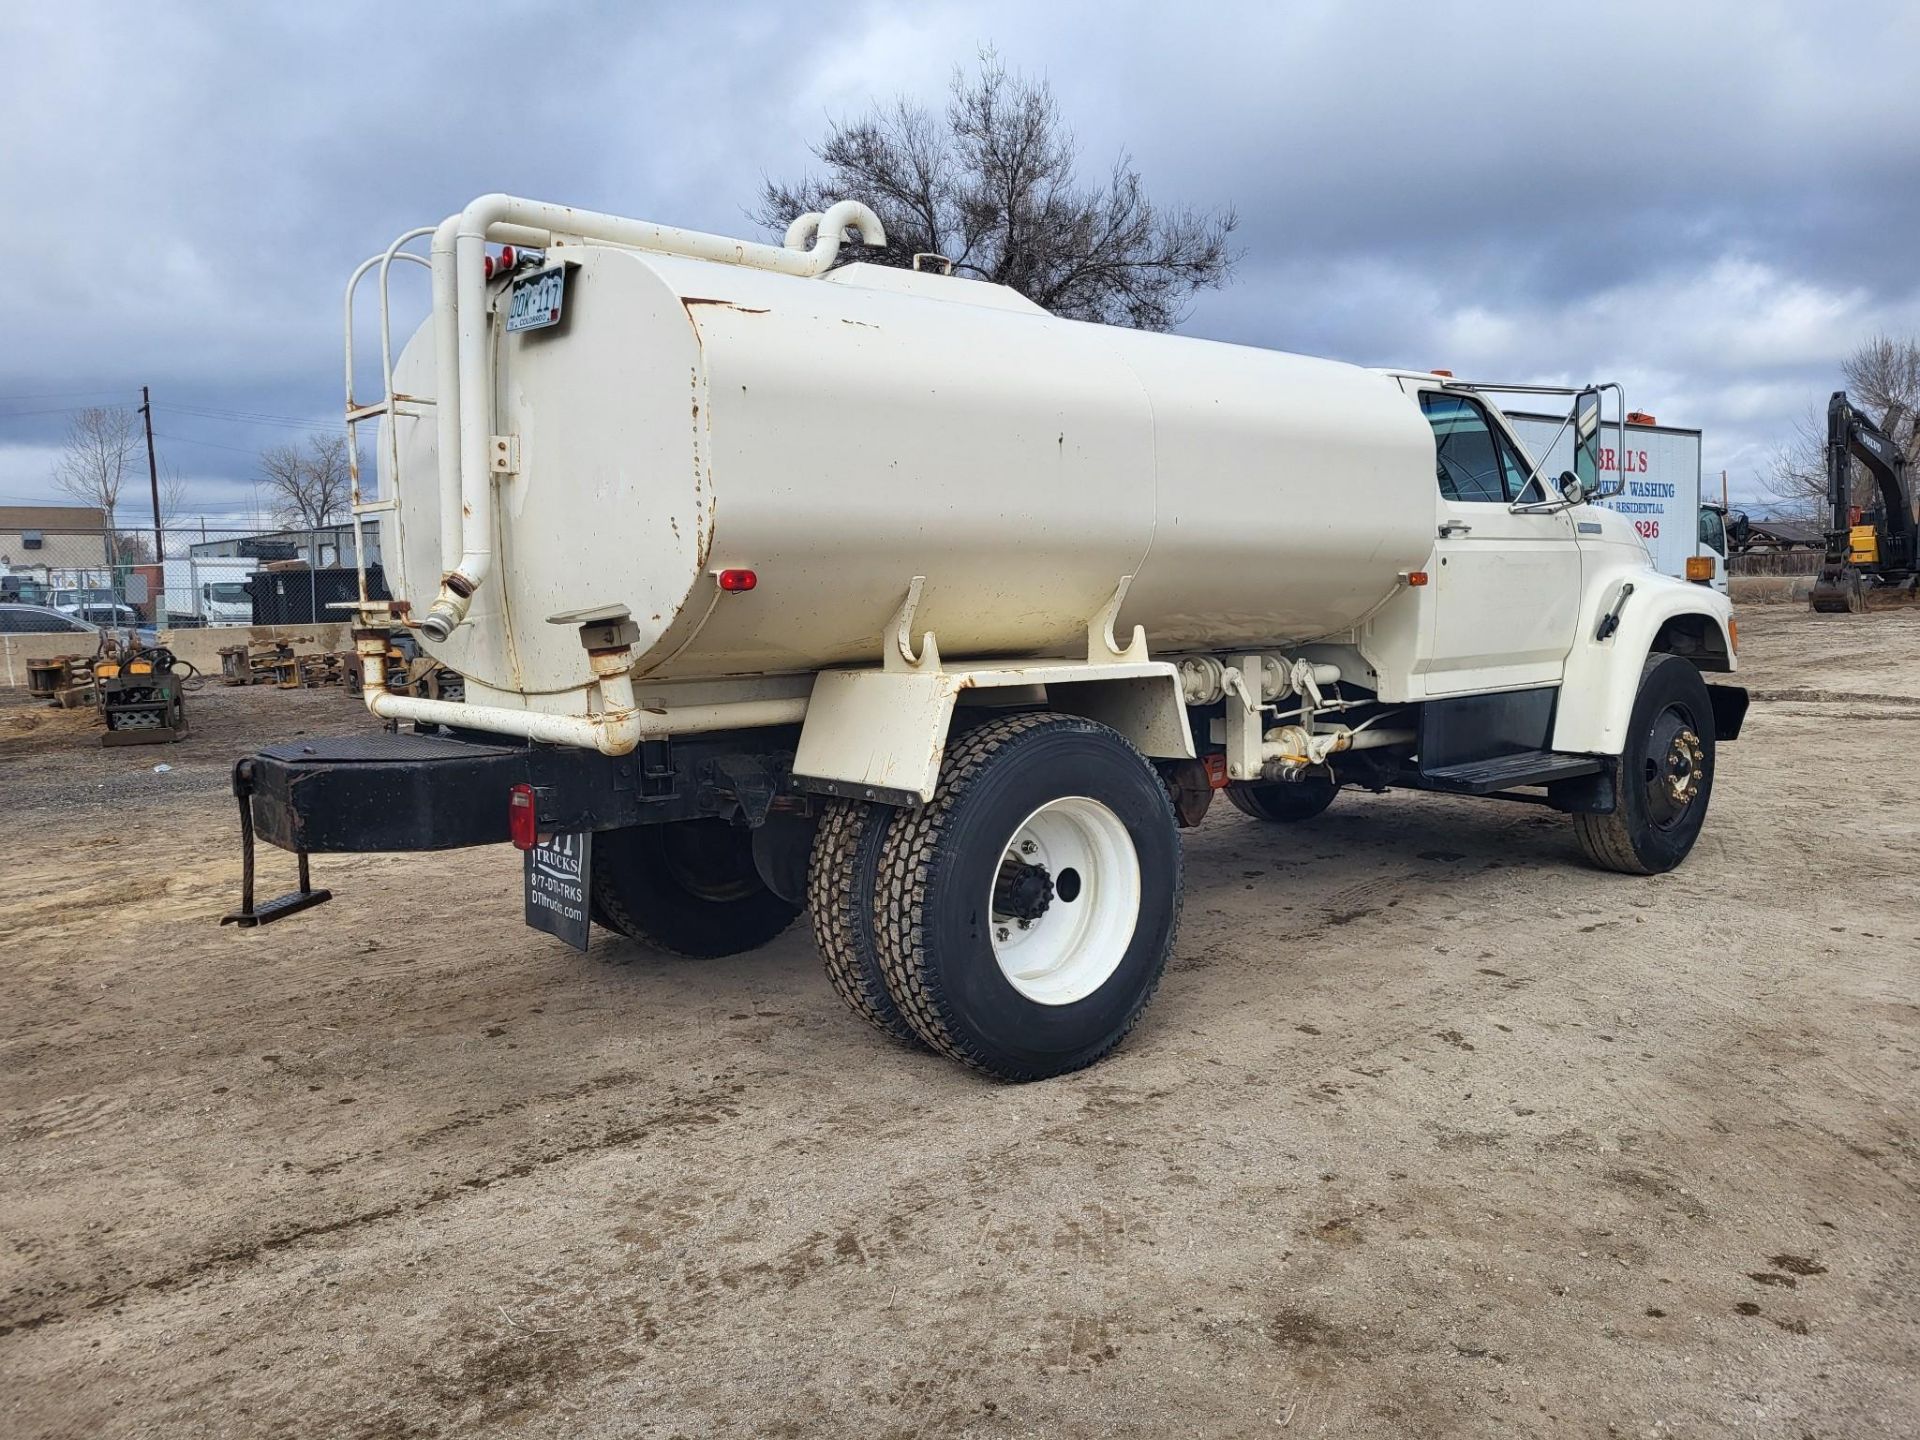 1995 FORD F800 WATER TRUCK - Image 5 of 20